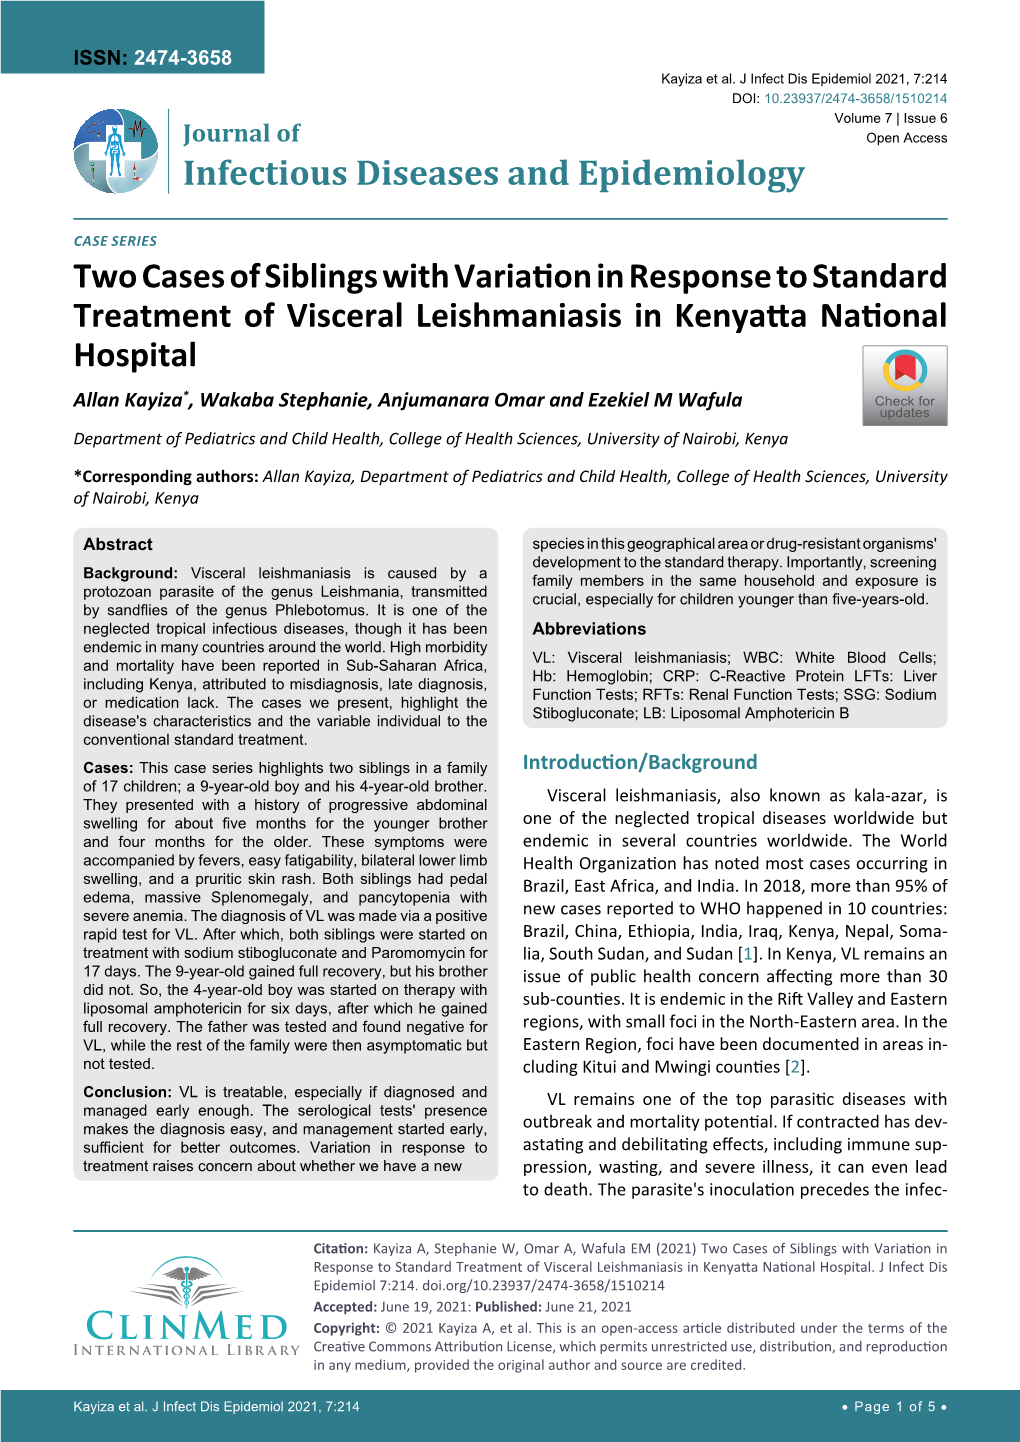 Two Cases of Siblings with Variation in Response to Standard Treatment of Visceral Leishmaniasis in Kenyatta National Hospital